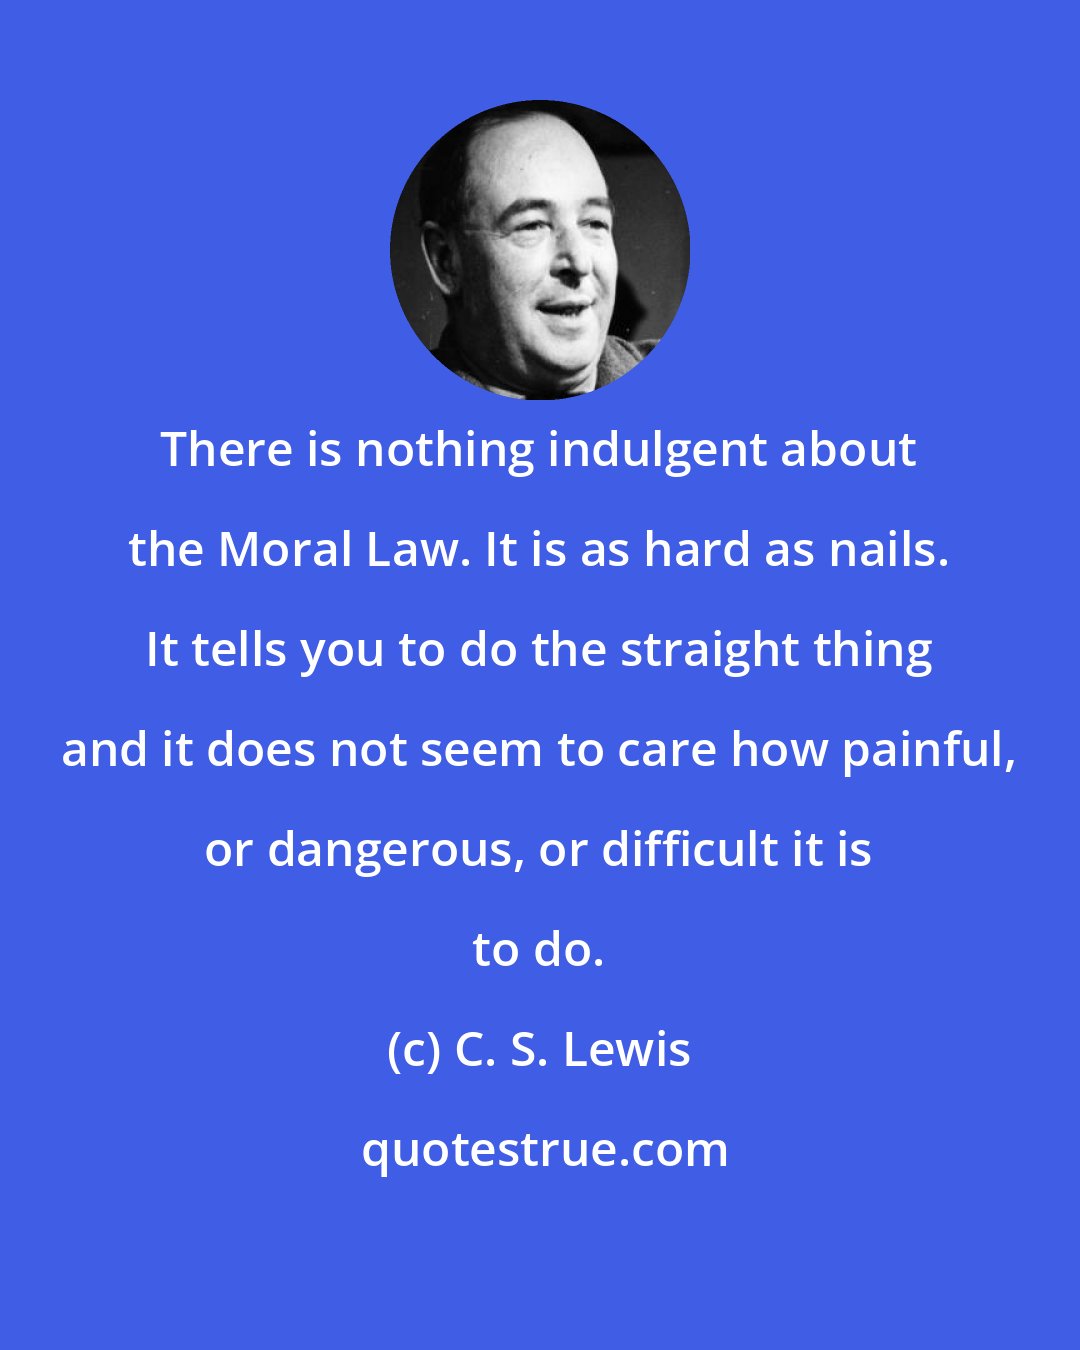 C. S. Lewis: There is nothing indulgent about the Moral Law. It is as hard as nails. It tells you to do the straight thing and it does not seem to care how painful, or dangerous, or difficult it is to do.